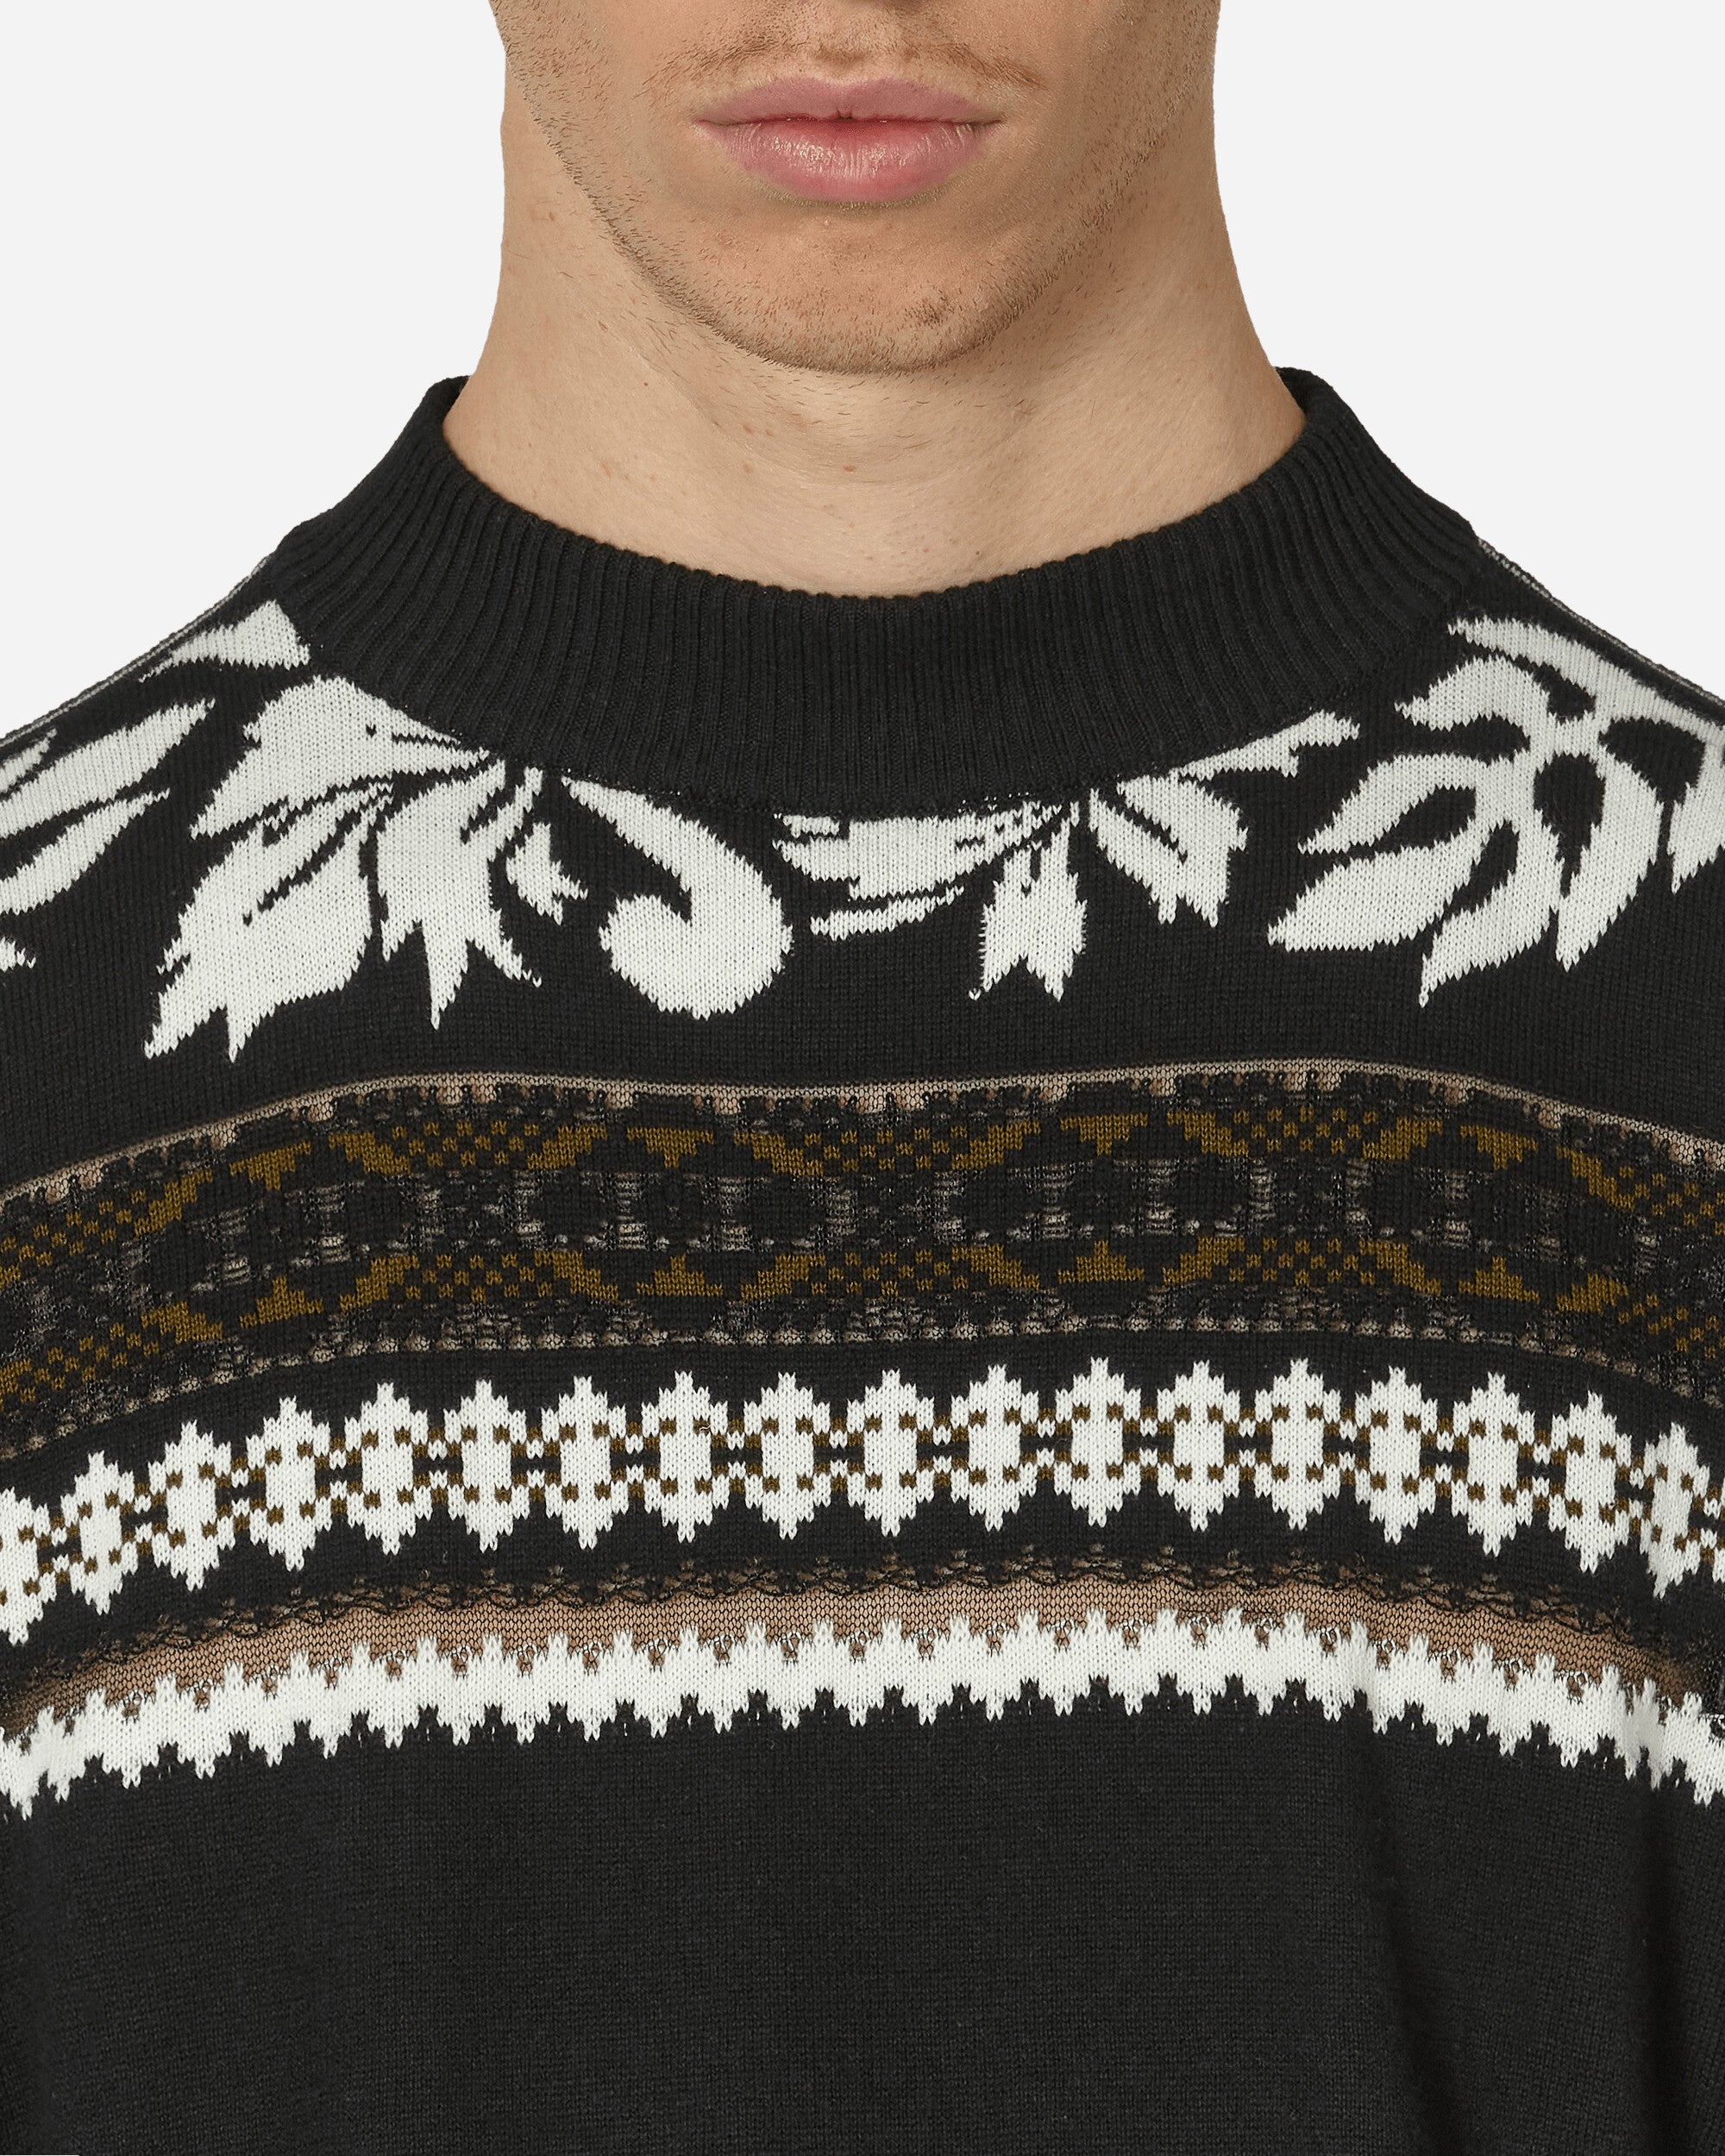 sacai Floral Jacquard Knit Pullover Black/Off White Knitwears Sweaters 24-03297M 004